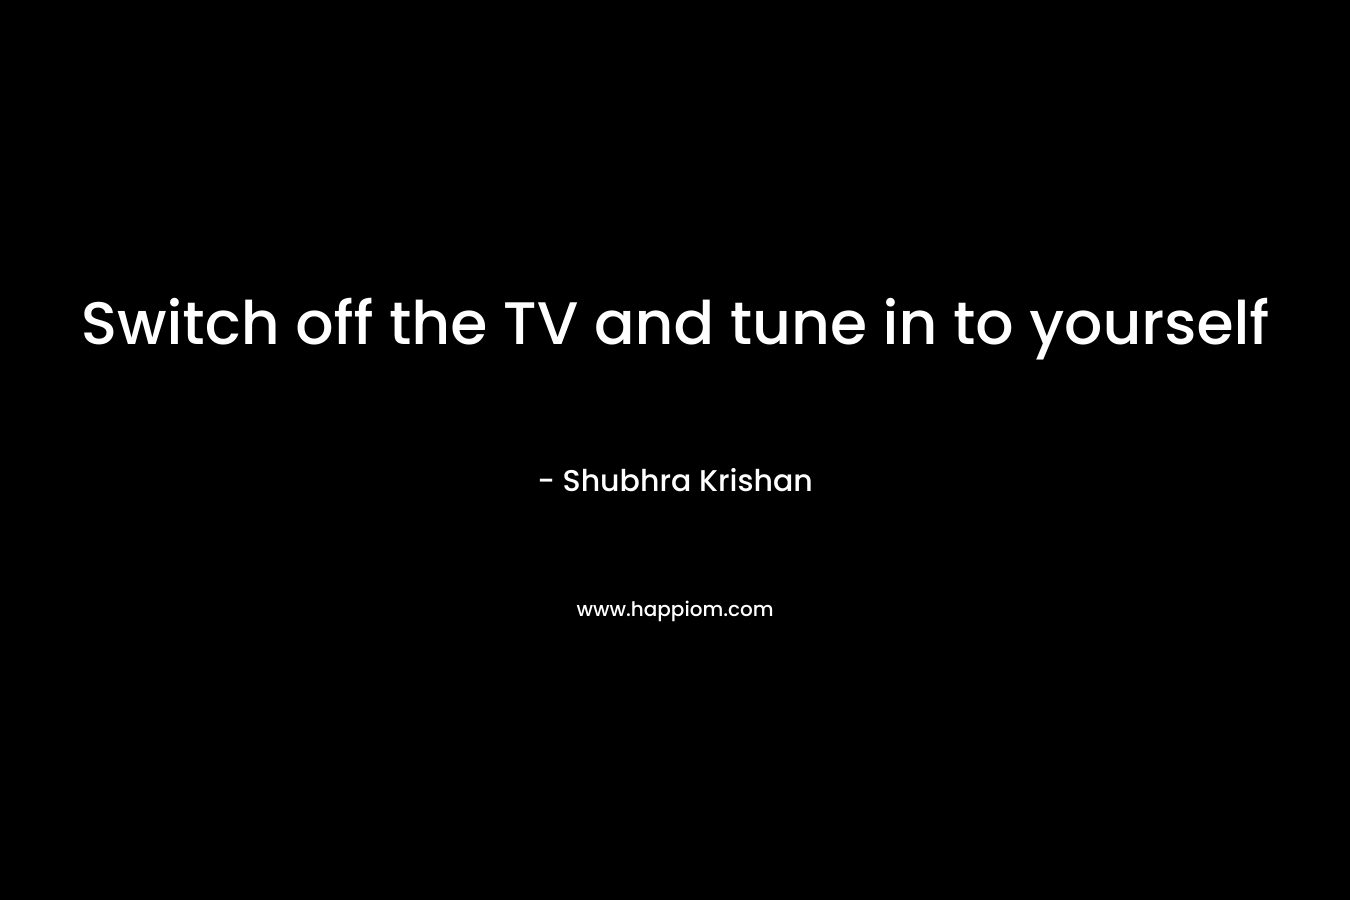 Switch off the TV and tune in to yourself – Shubhra Krishan